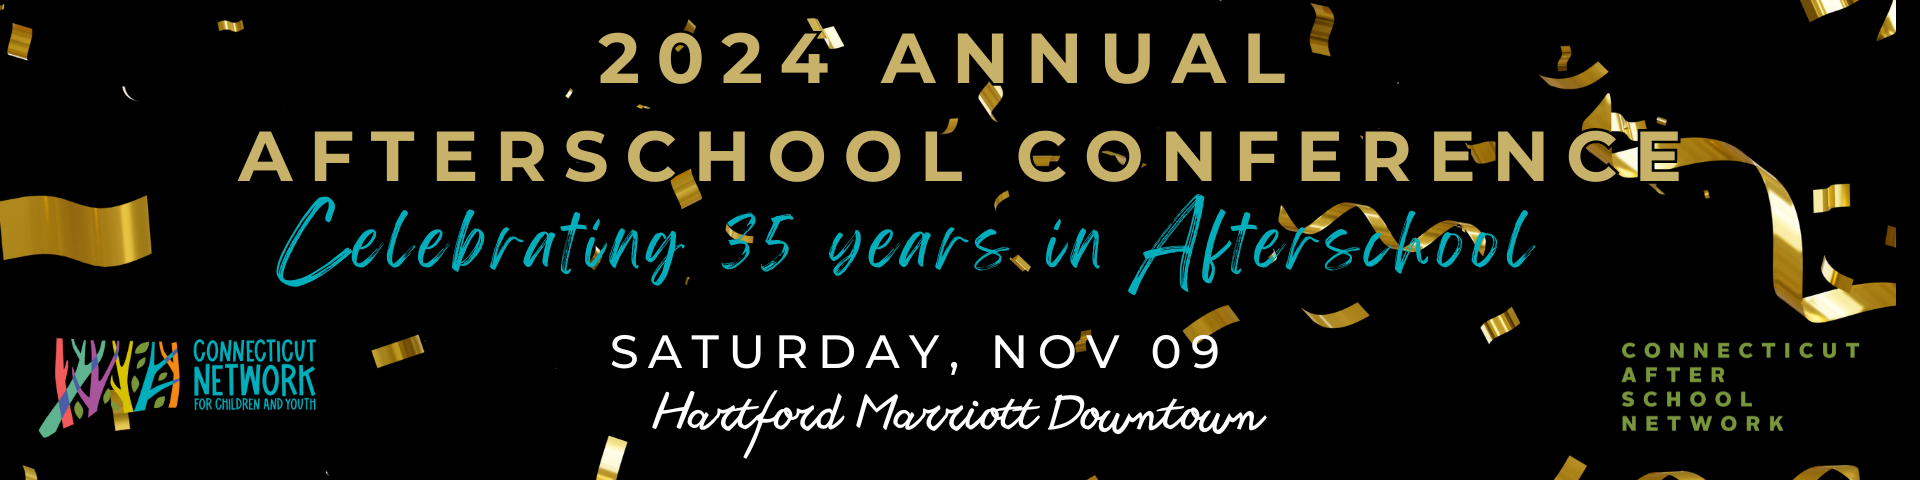 2024 Annual Afterschool Conference